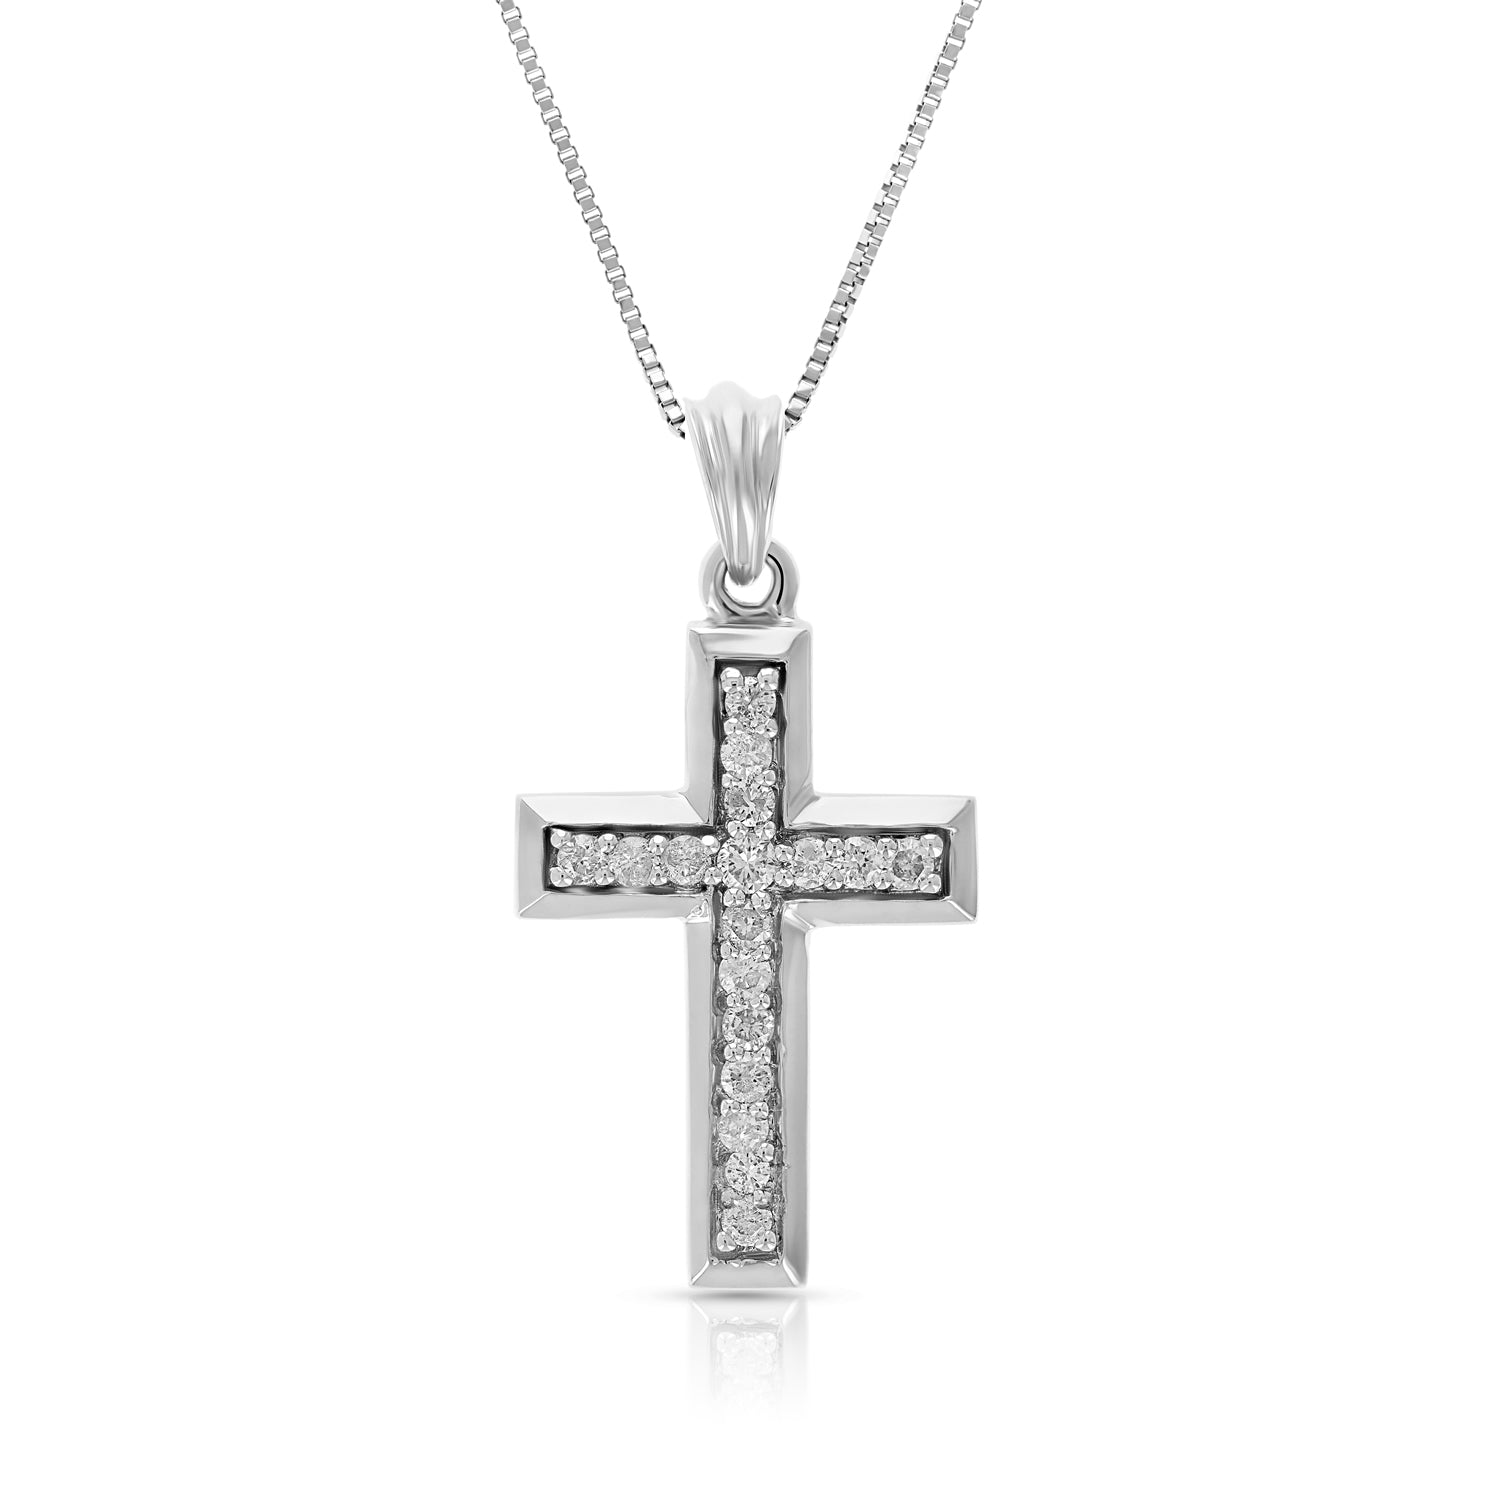 1/4 cttw Diamond Cross Pendant Necklace 14K White Gold with 18 Inch Chain